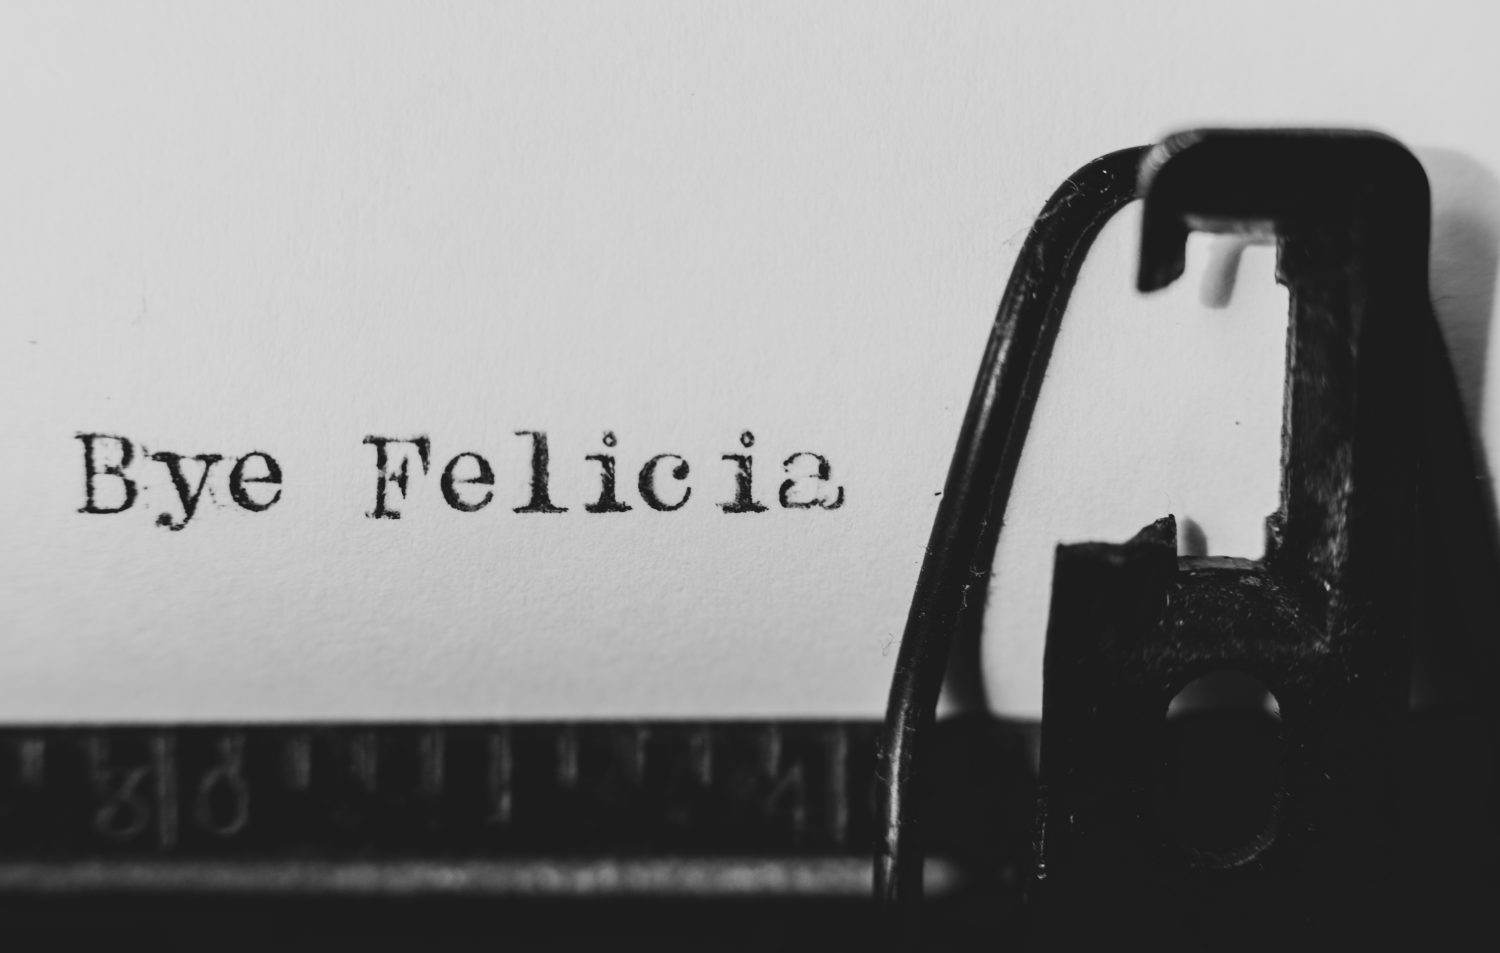 Bye Felicia typed with an antique typewriter on vintage typewriter paper in black and white with some added grain to achieve a vintage look